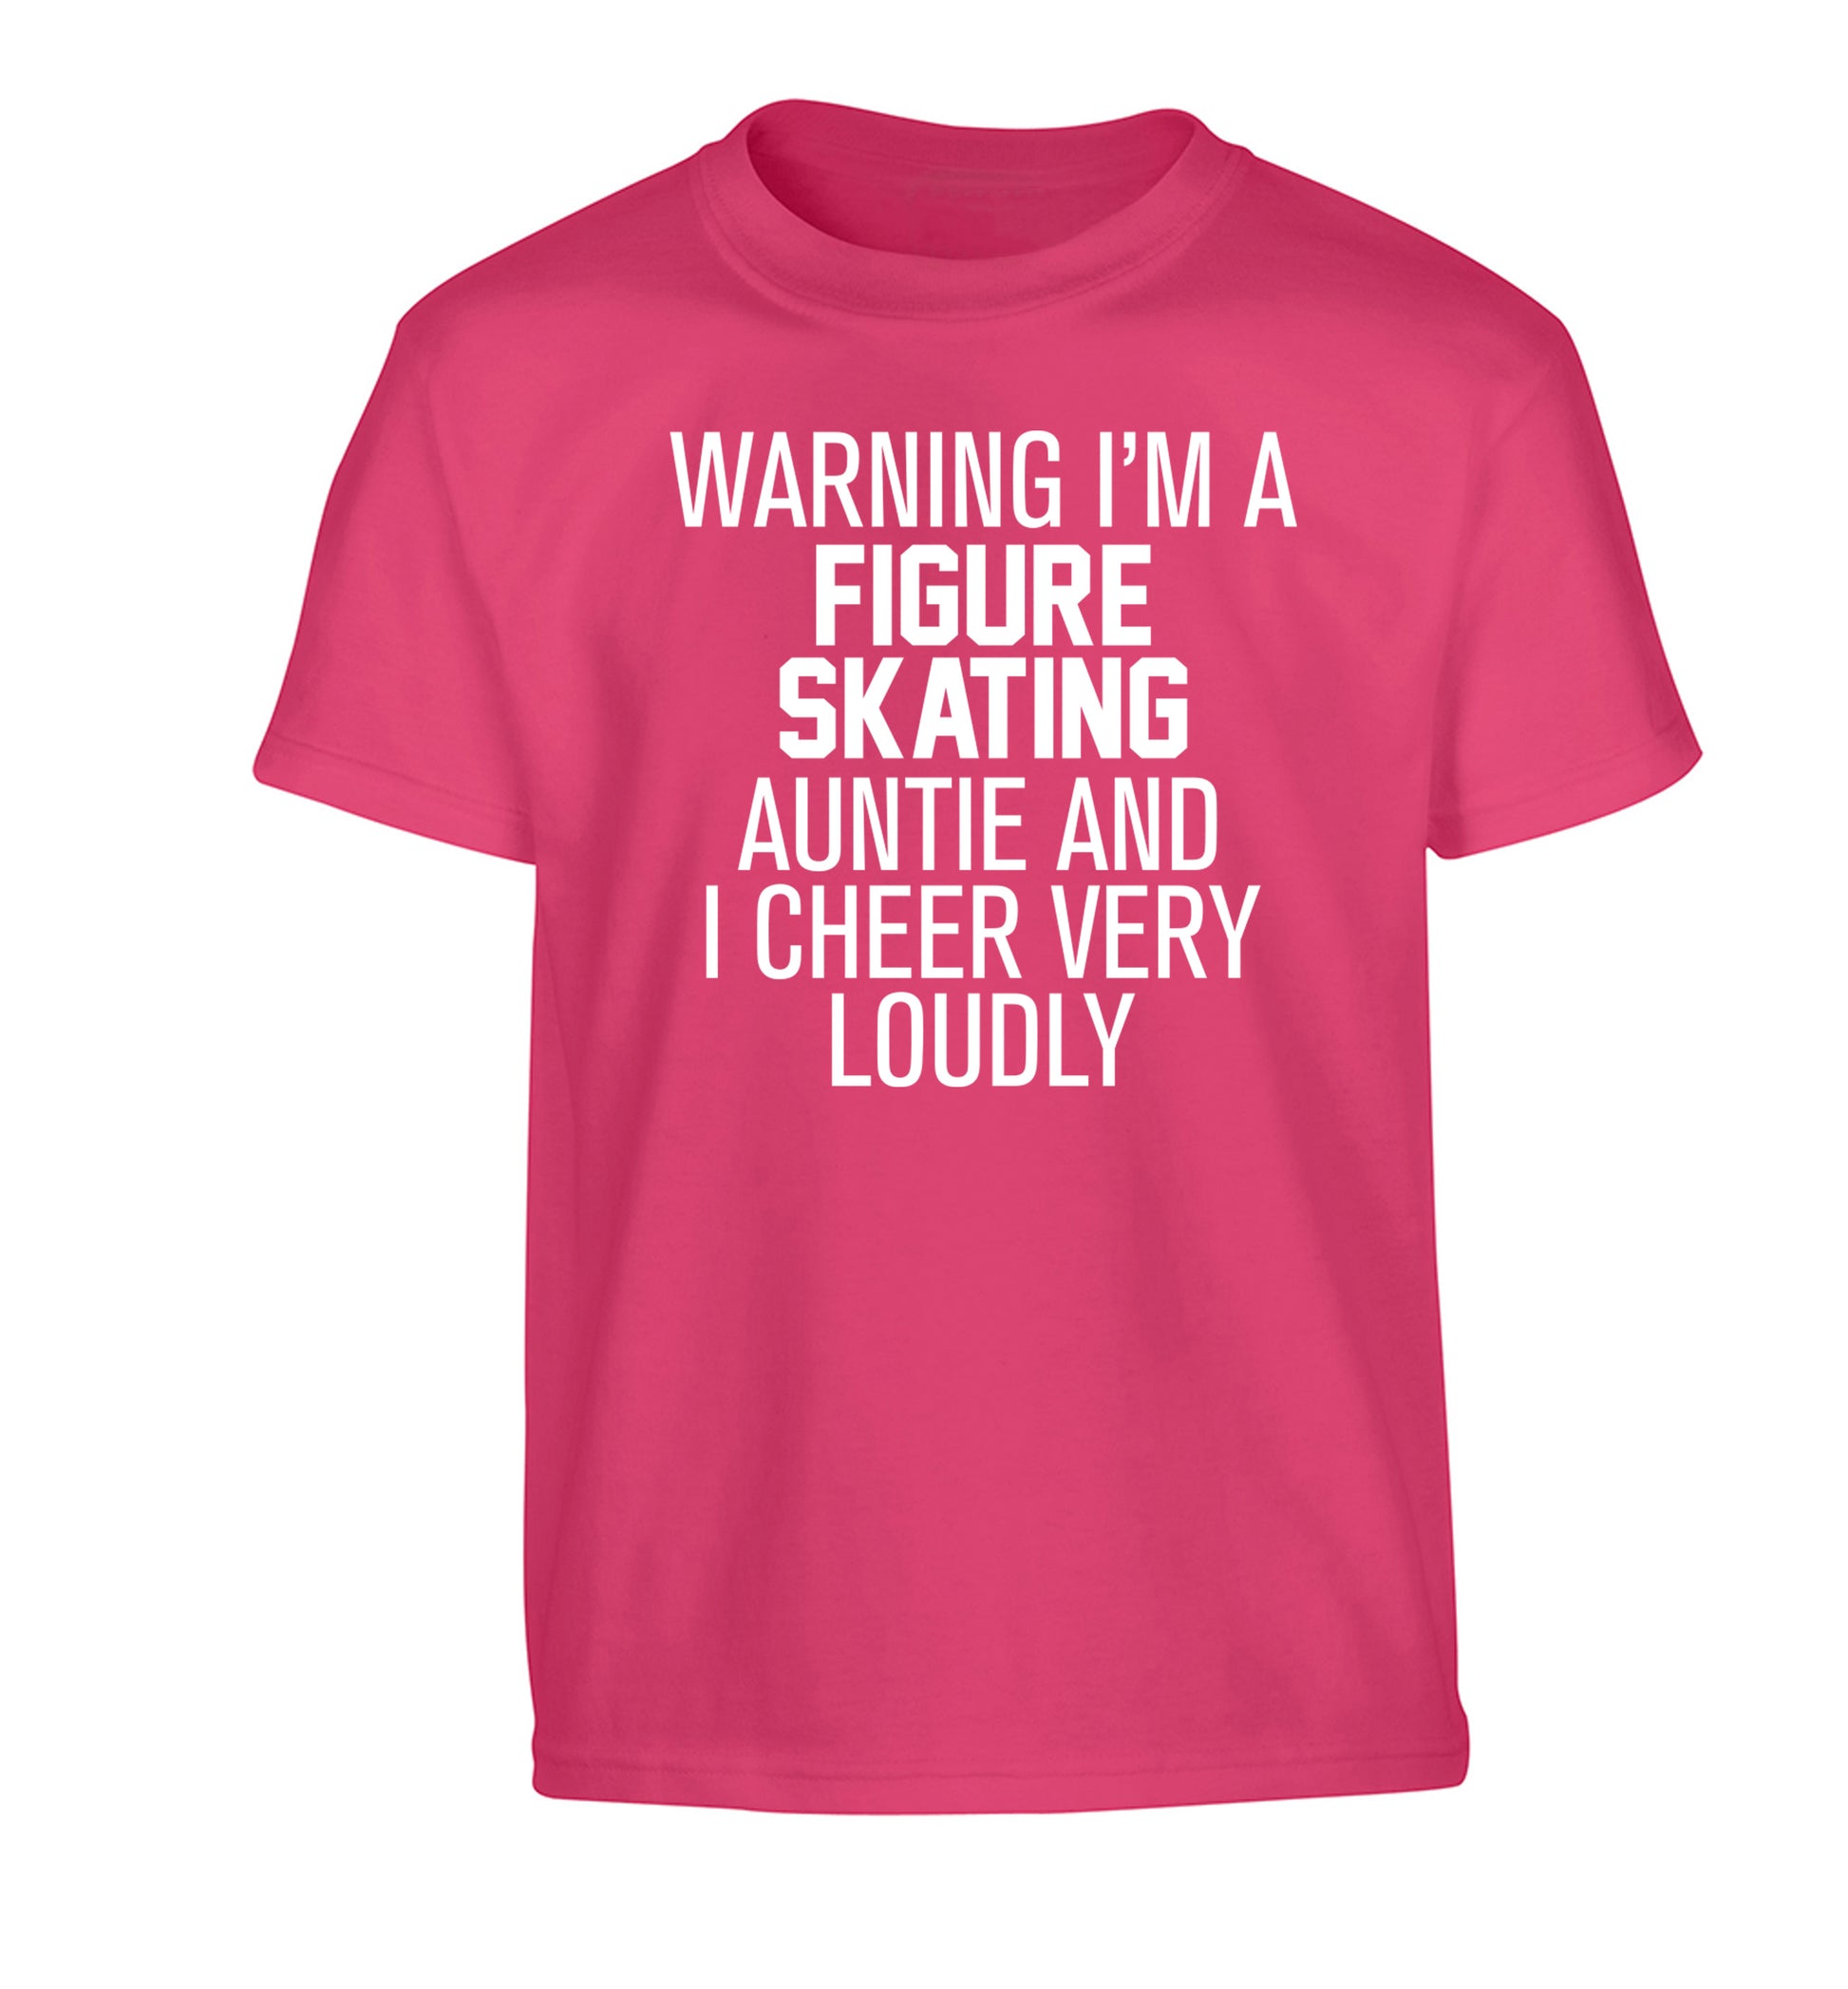 Warning I'm a figure skating auntie and I cheer very loudly Children's pink Tshirt 12-14 Years